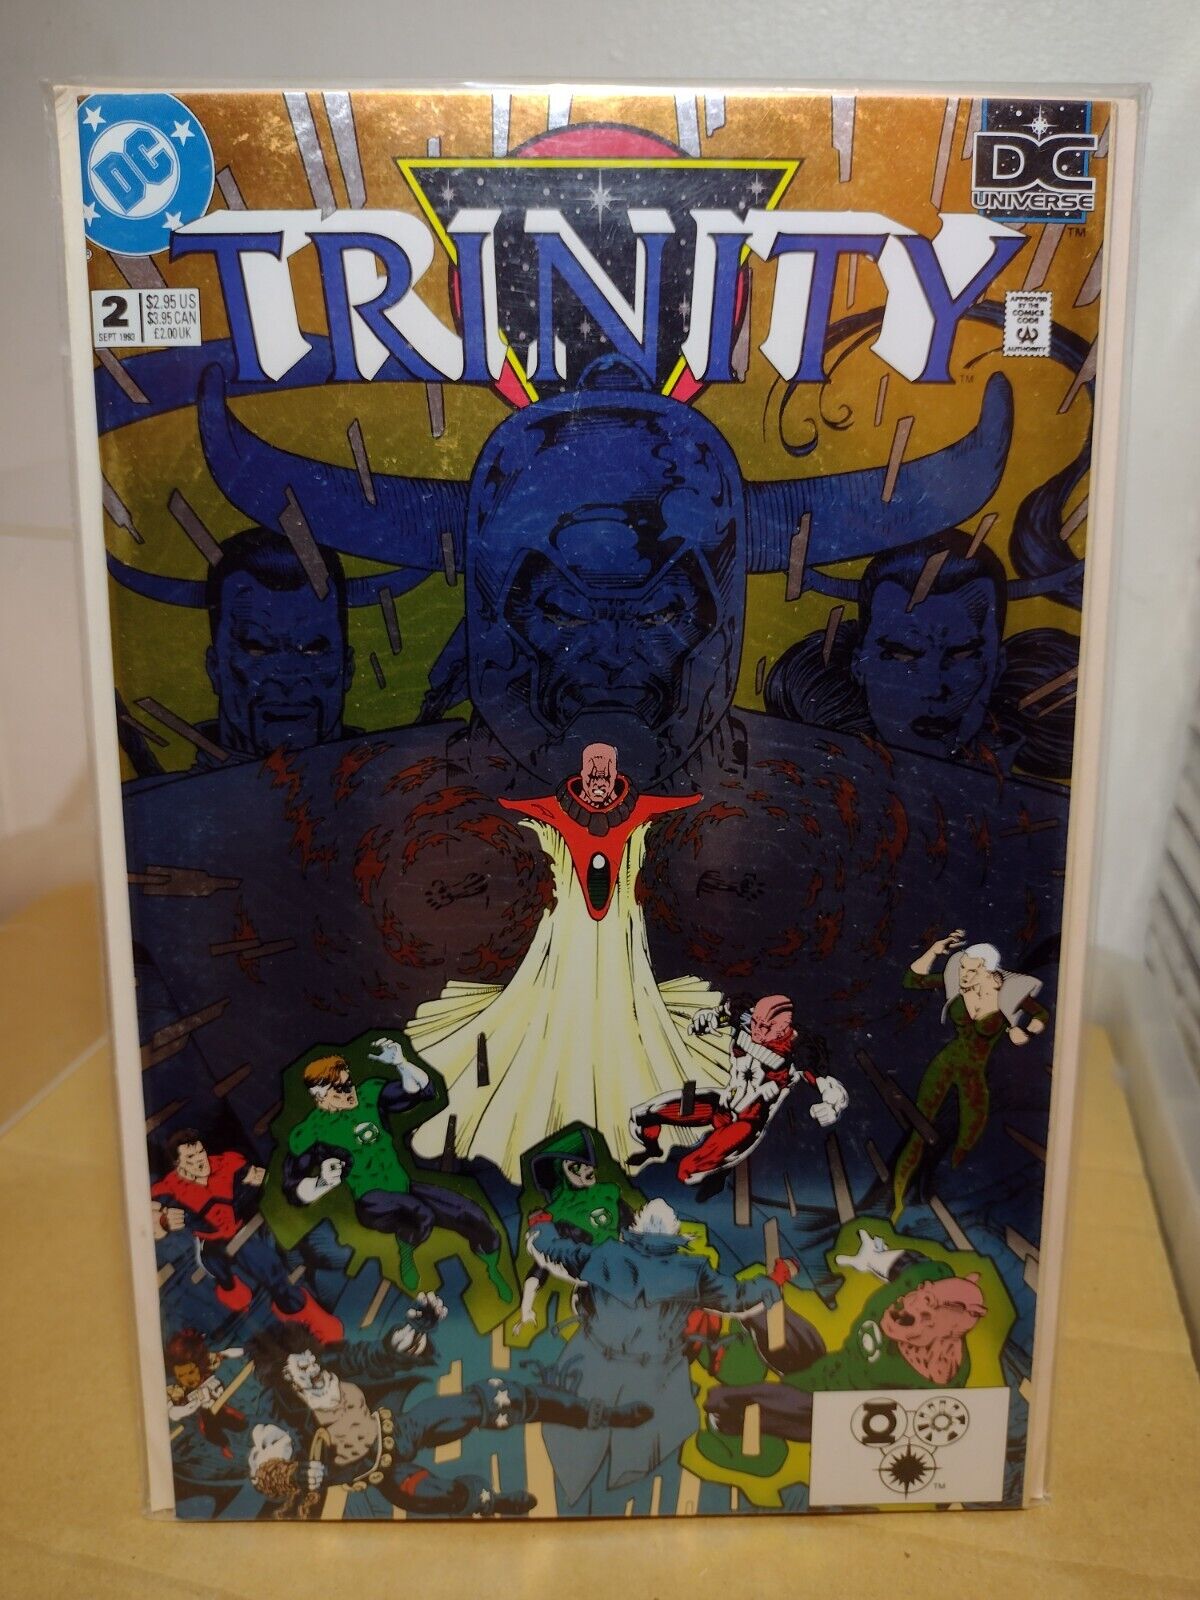 Trinity #2 (1993, DC Comics) New Warehouse Inventory in VG/VF Condition